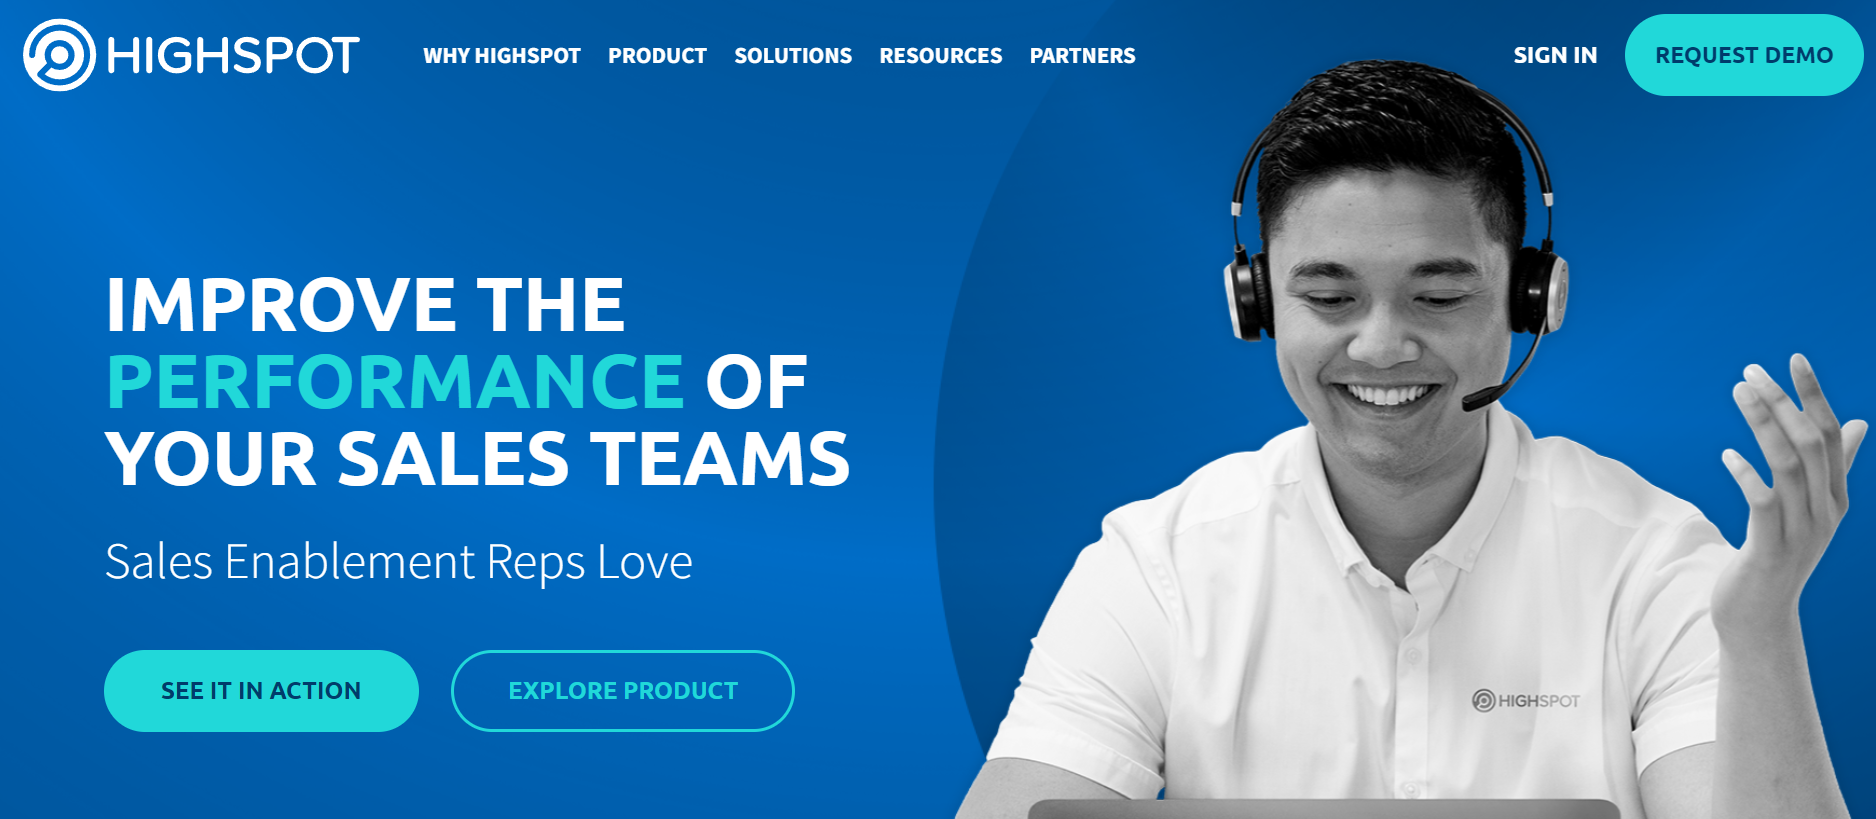 Highspot homepage: Improve the Performance of Your Sales Team